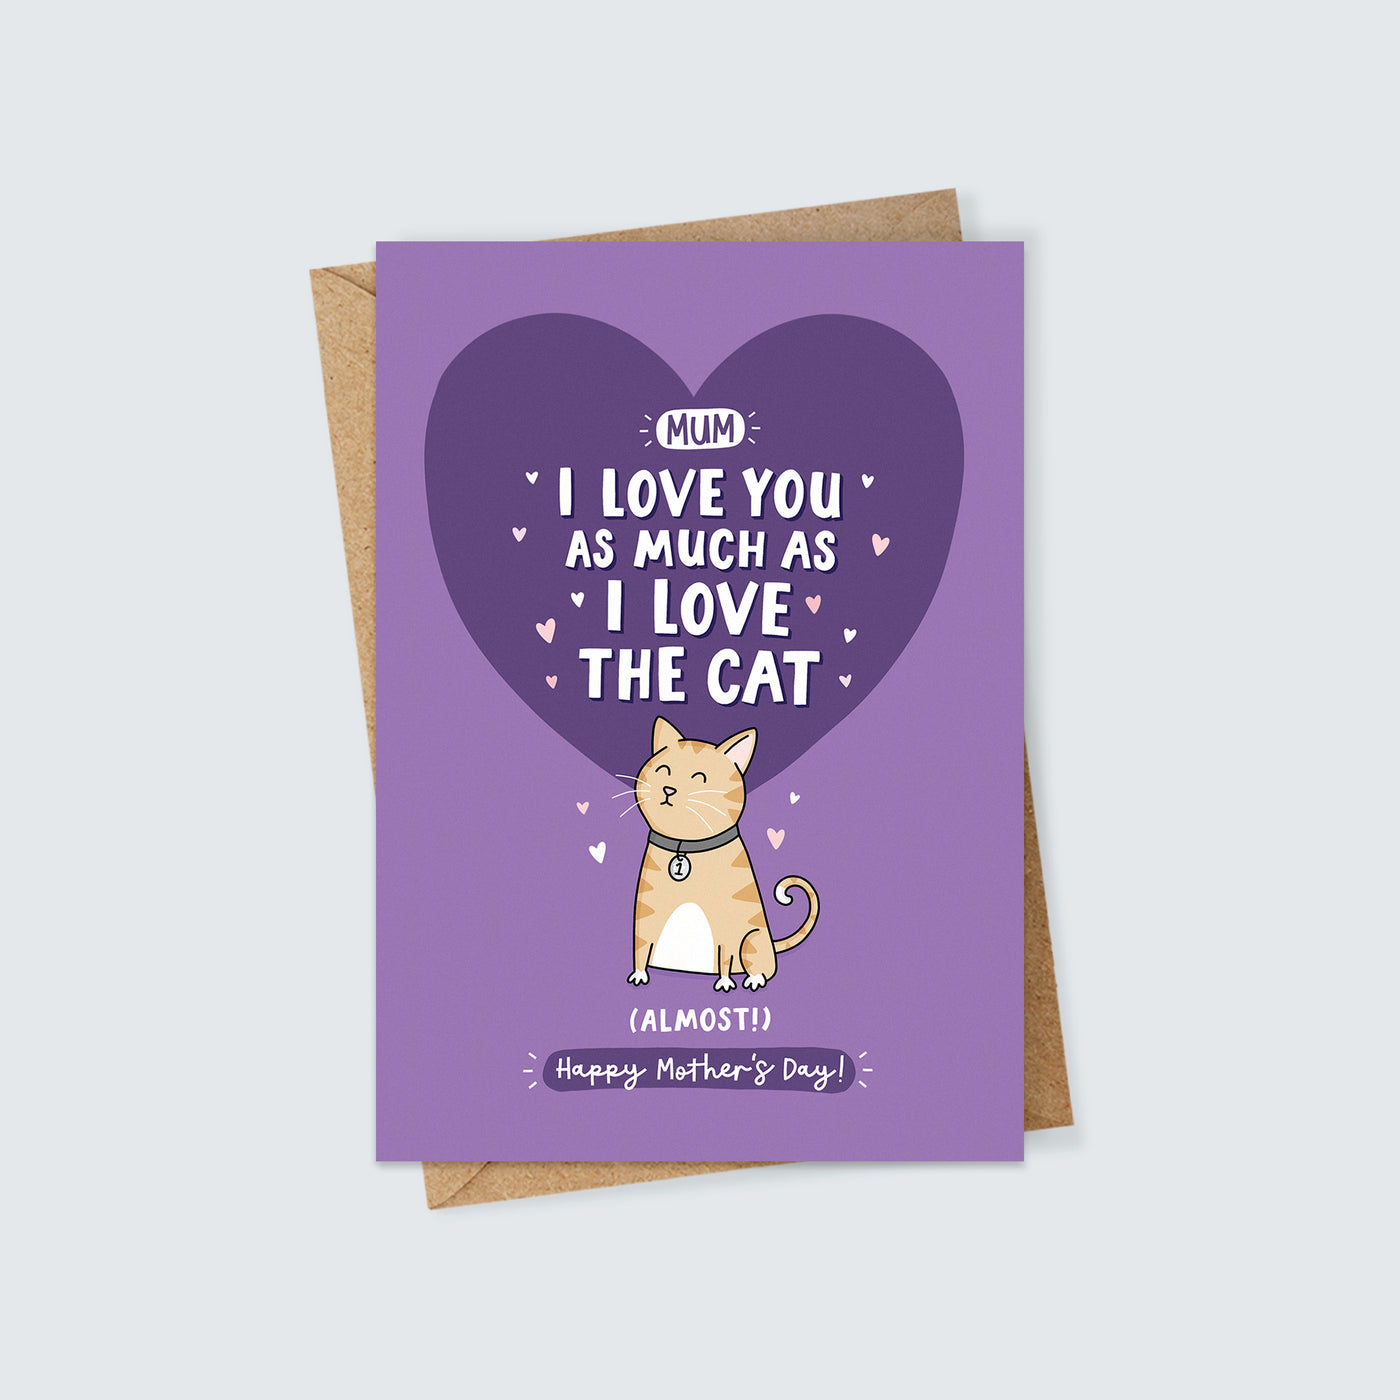 Mum I Love You as Much as I Love the Cat (Almost!) Mother's Day Card